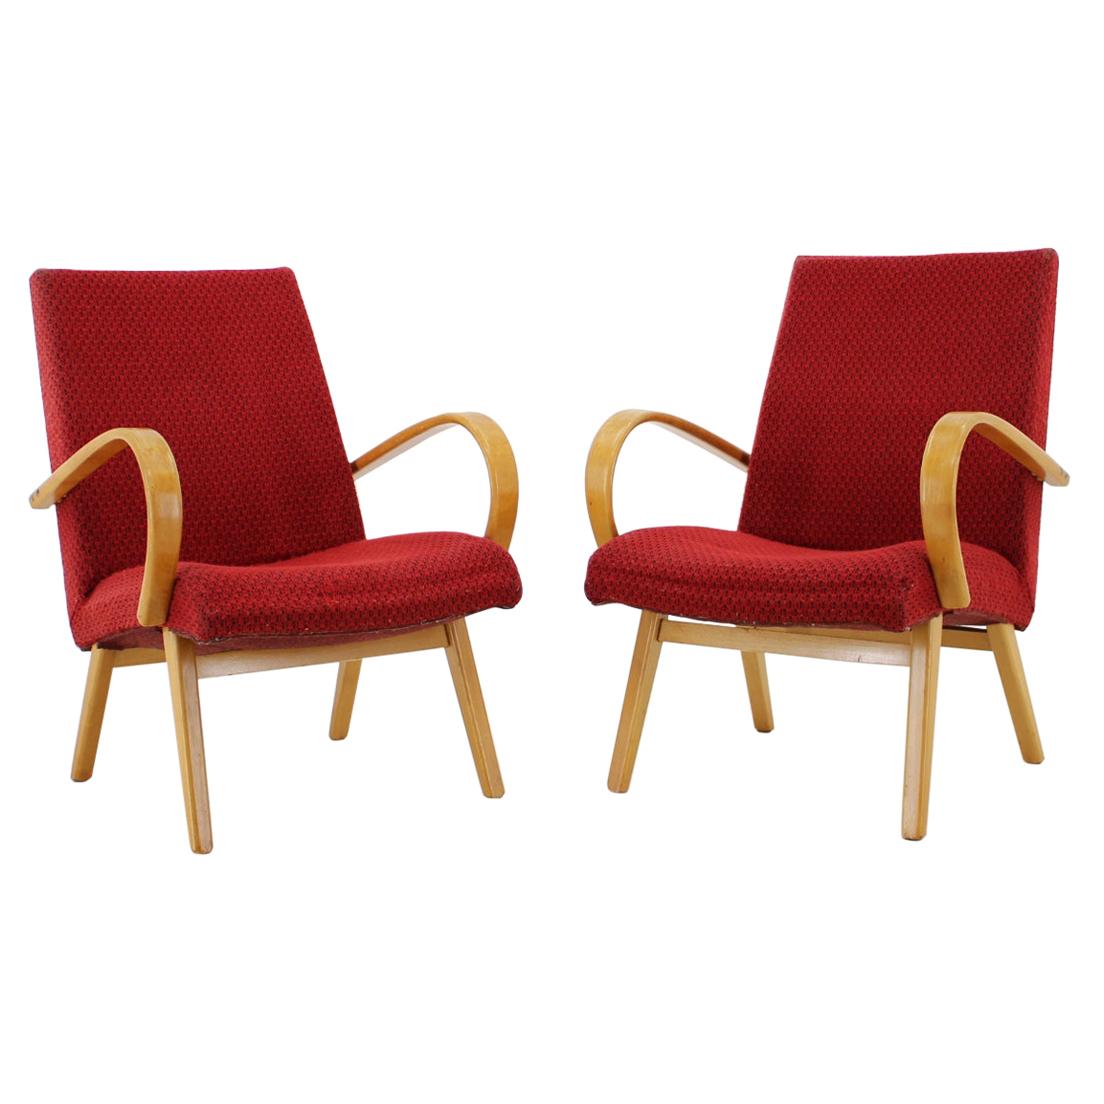 1960s Thon/Thonet Bentwood Lounge Chair, Set of 2